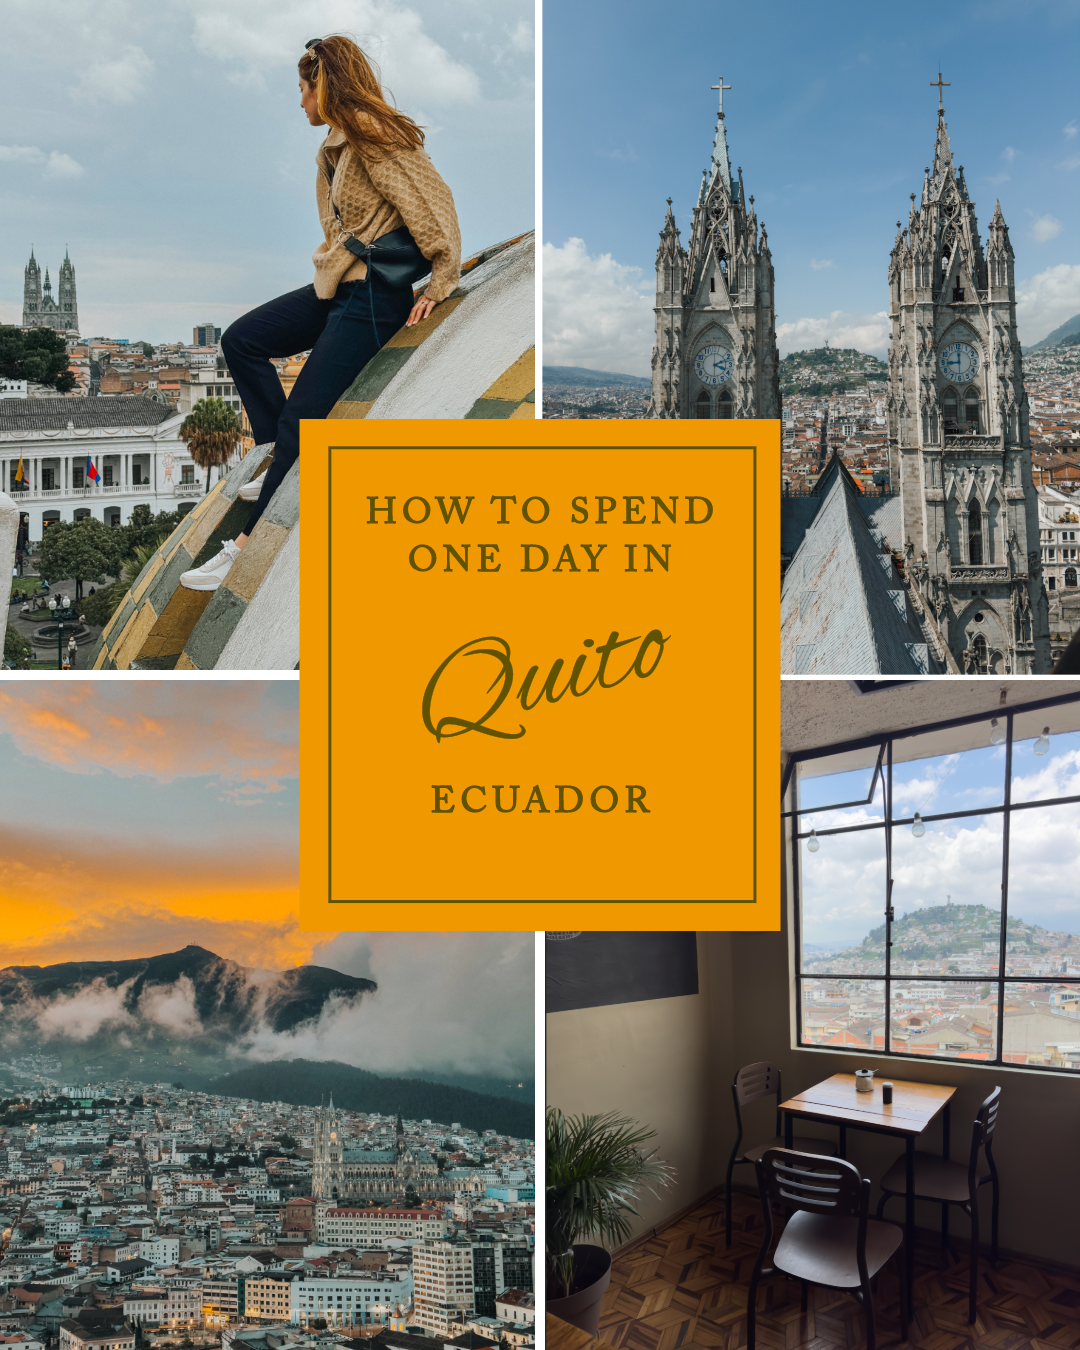 How to spend one day in quito, Ecuador